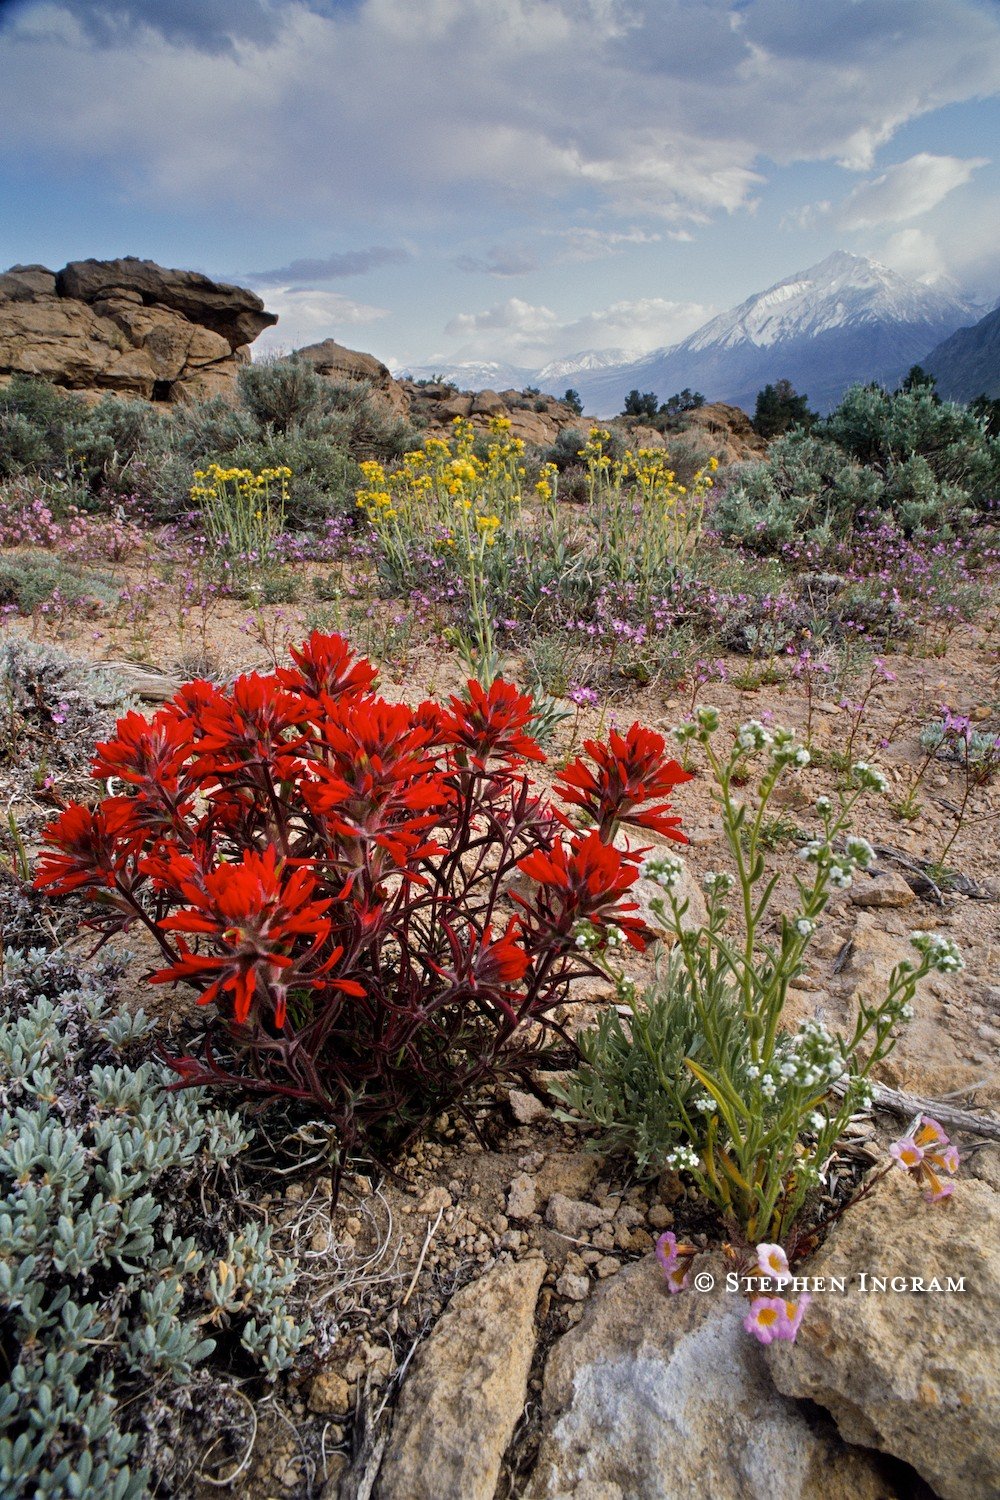 Desert paintbrush, yellow-throats, yellow-flowered cryptantha, and other species among Bishop tuff with Mt. Tom in background, Sherwin Hill, Mono Co., CA